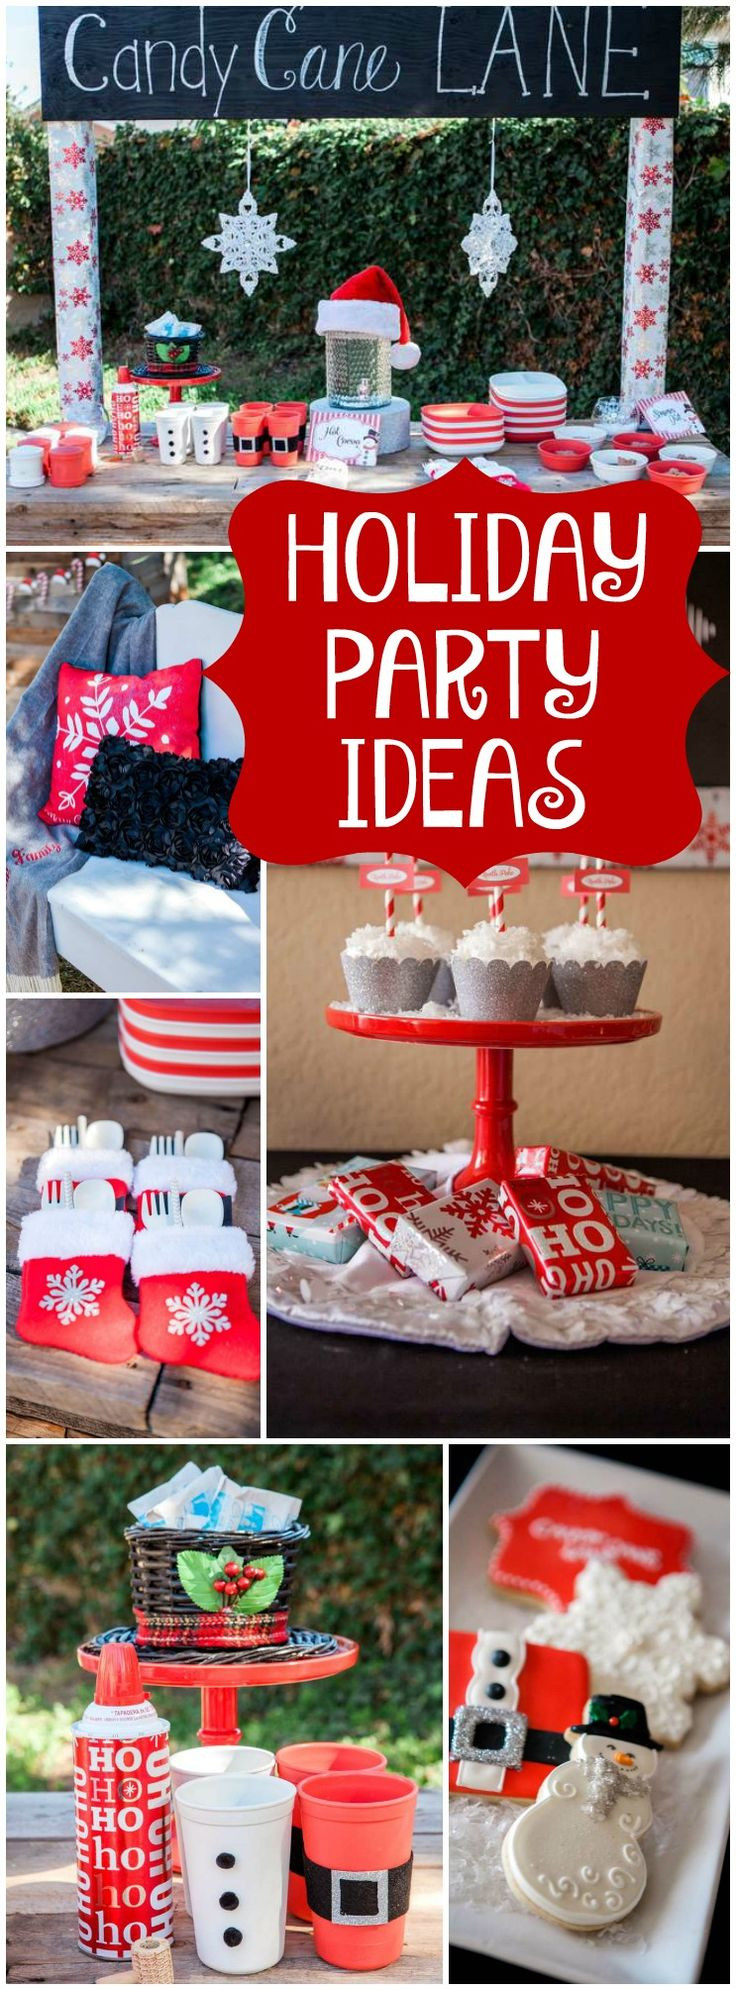 Christmas Candy Games
 Best 25 Candy cane game ideas on Pinterest